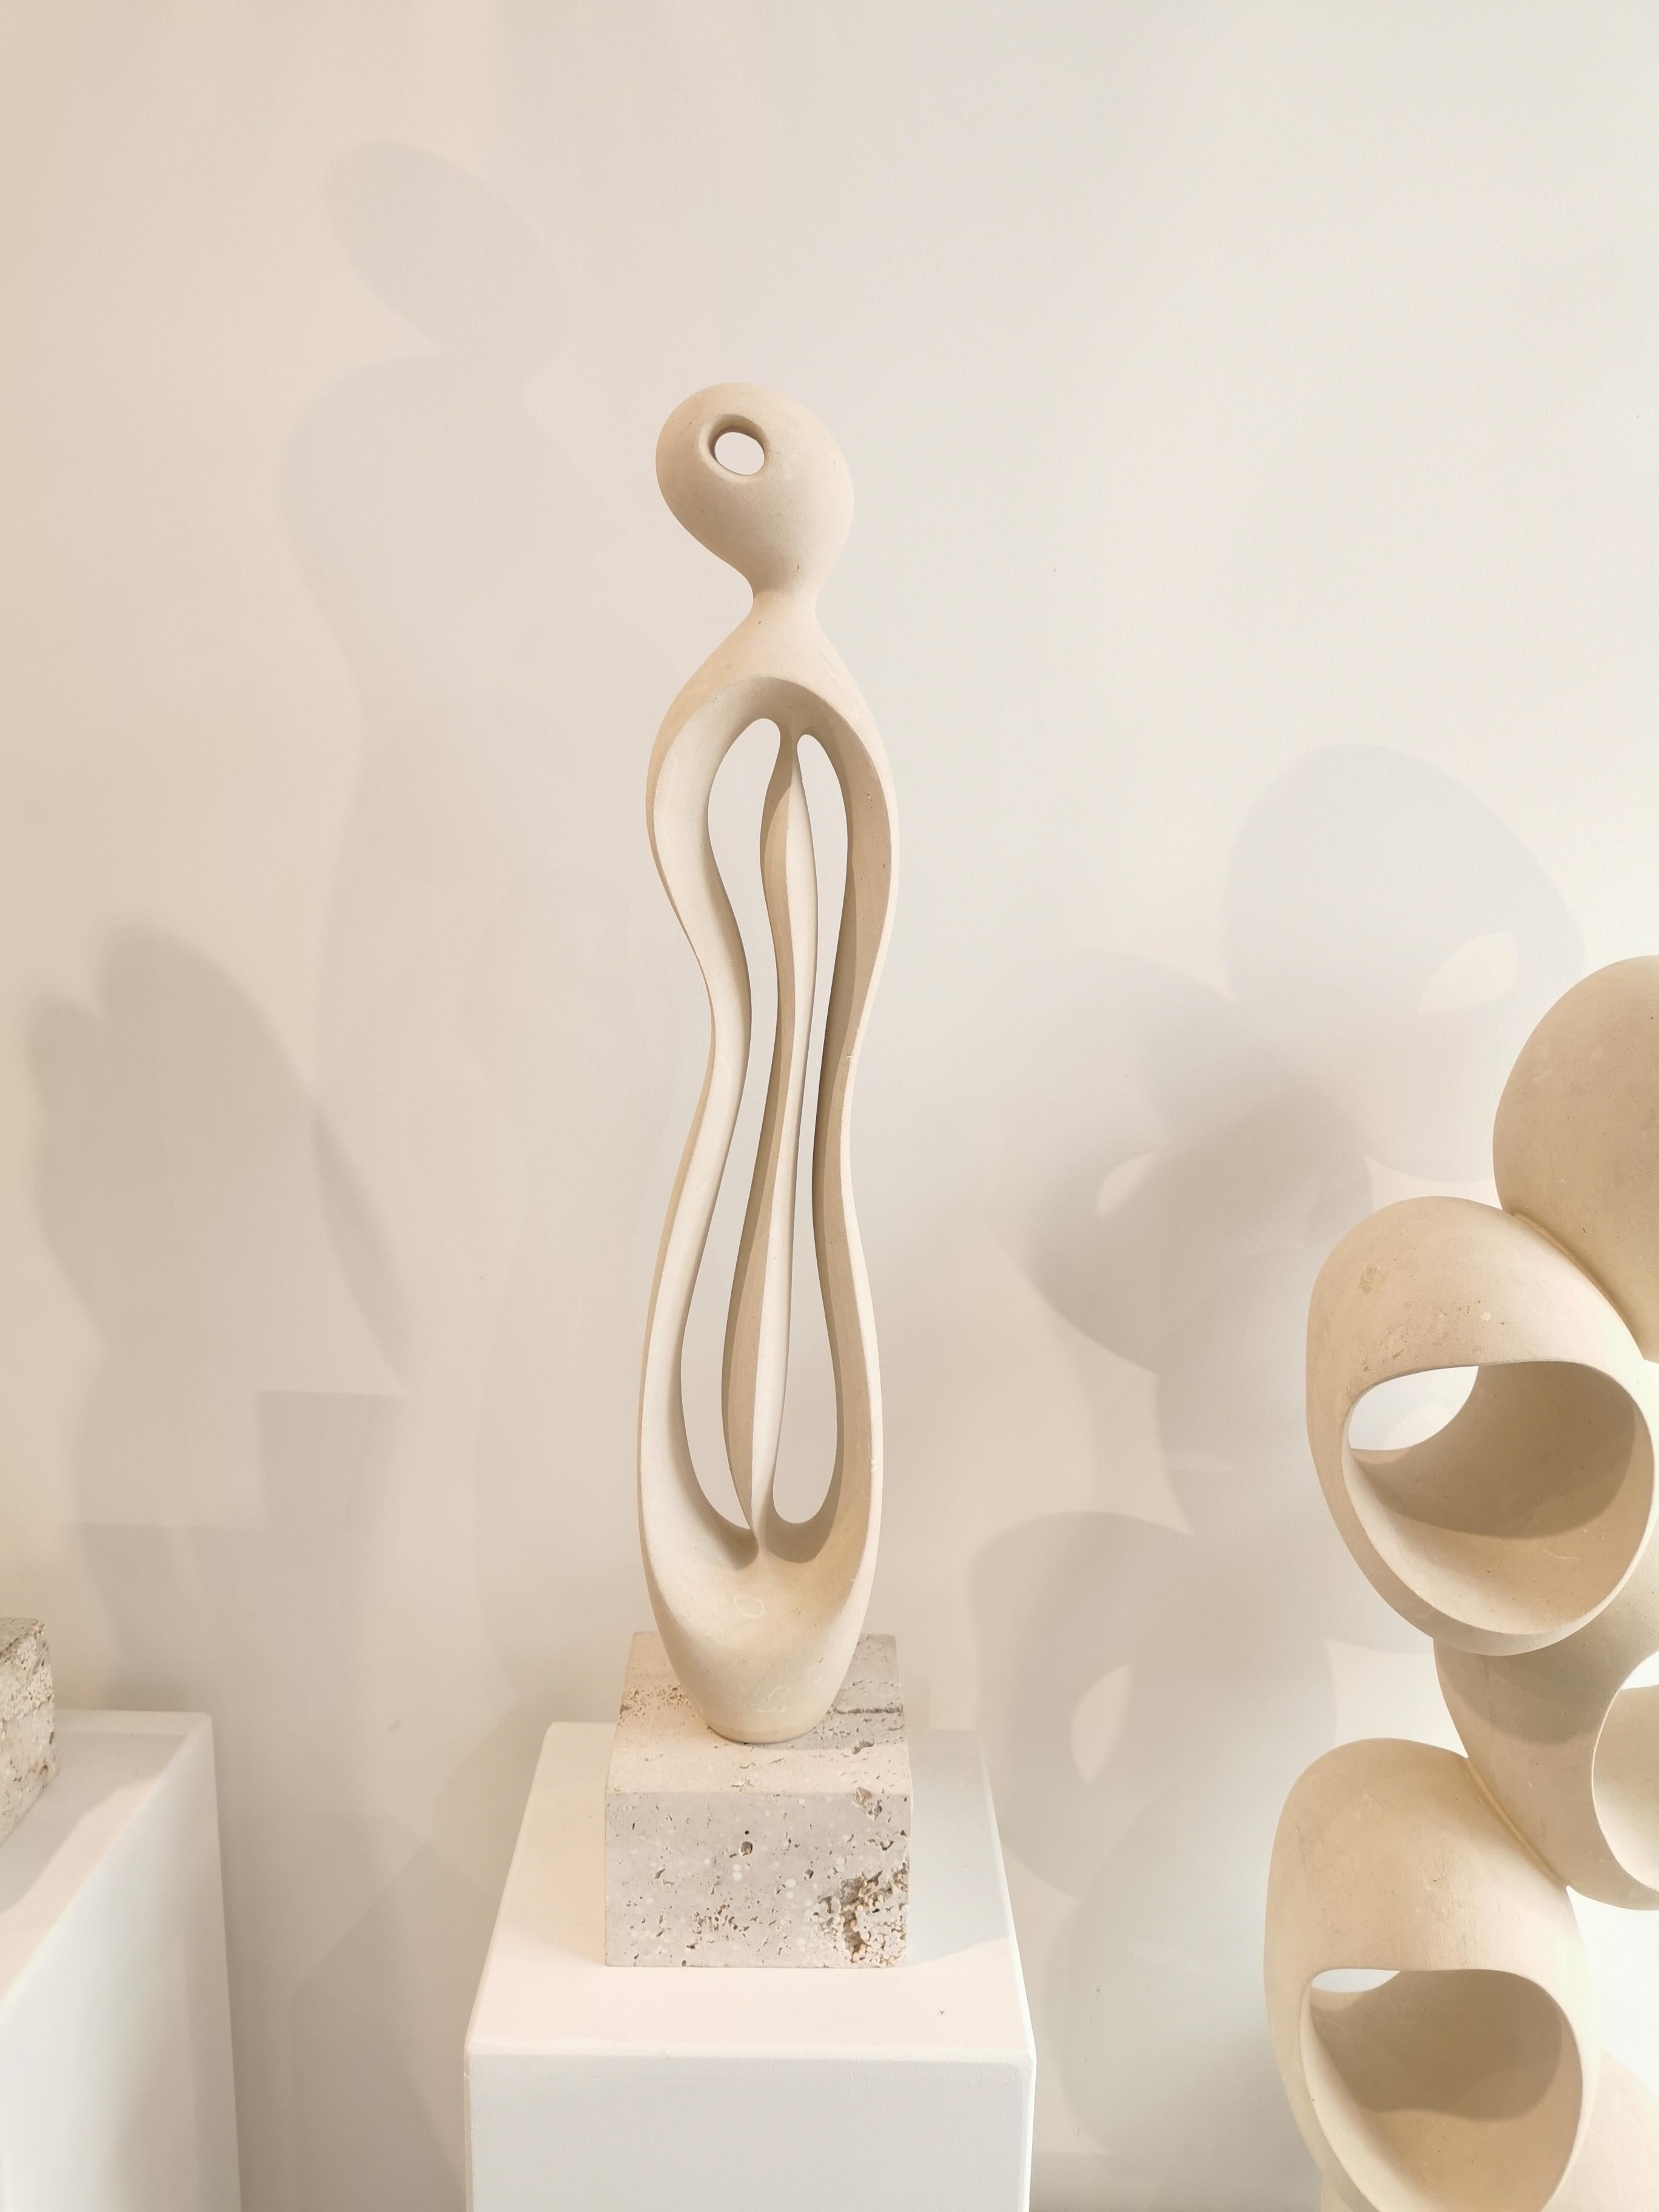 21st century abstract sculpture MATER by Renzo Buttazzo from Italy

Sculpture in Lecce Stone
Delivered with a certificate of authenticity.
Contact us on 1stDibs to acquire a different size than the one shown here (60 x 11 x 08 cm  23,62'' x 4,33'' x